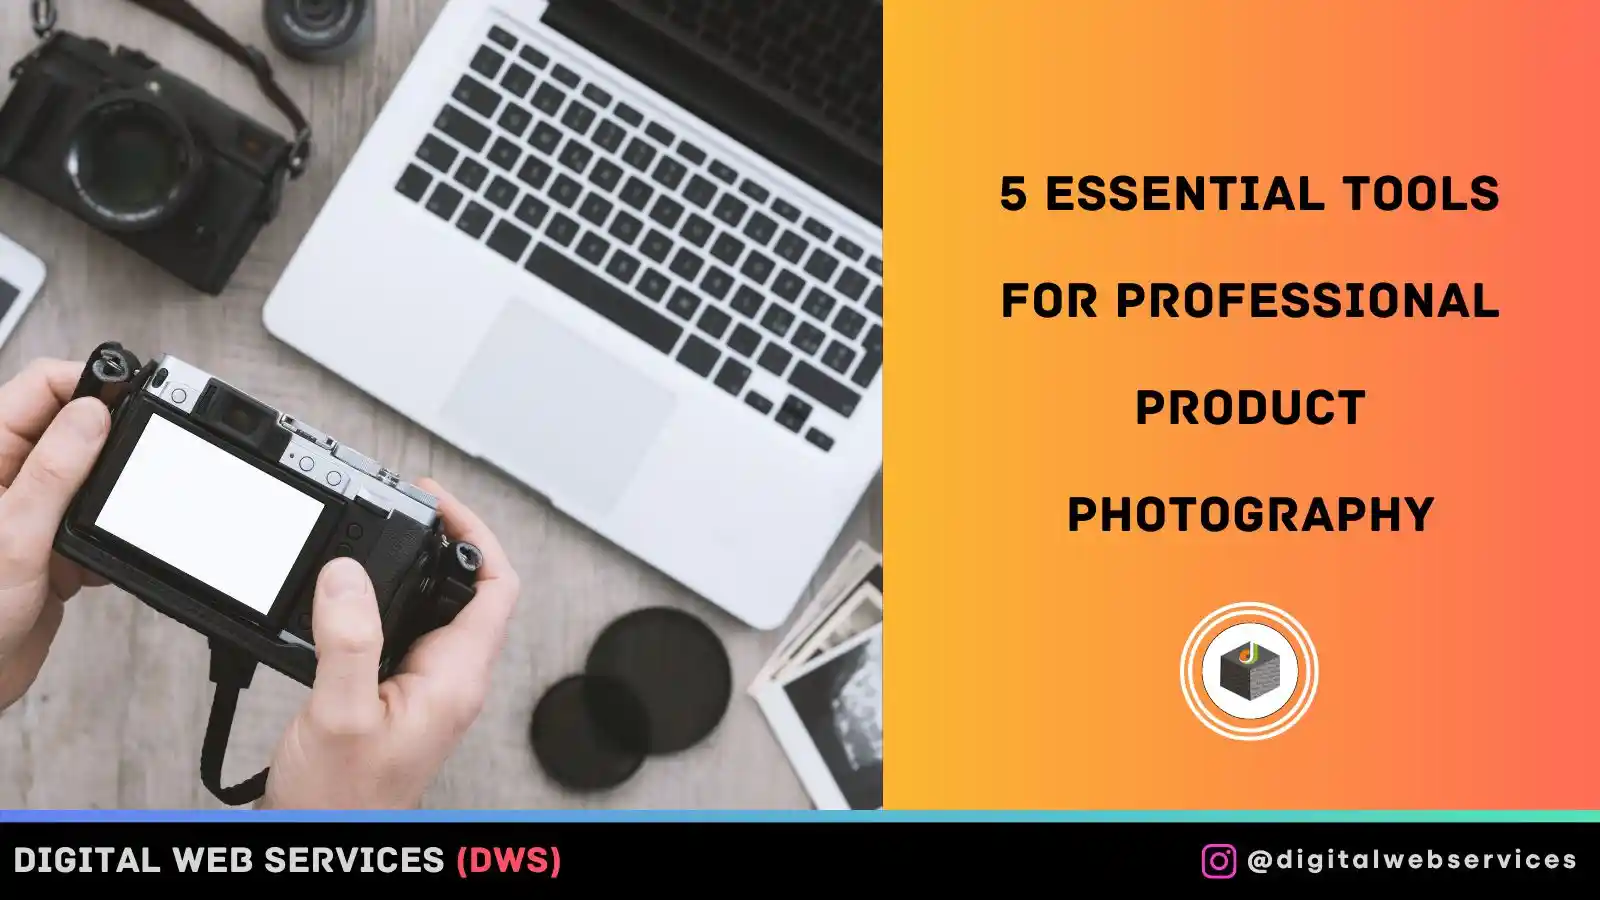 Professional Product Photography